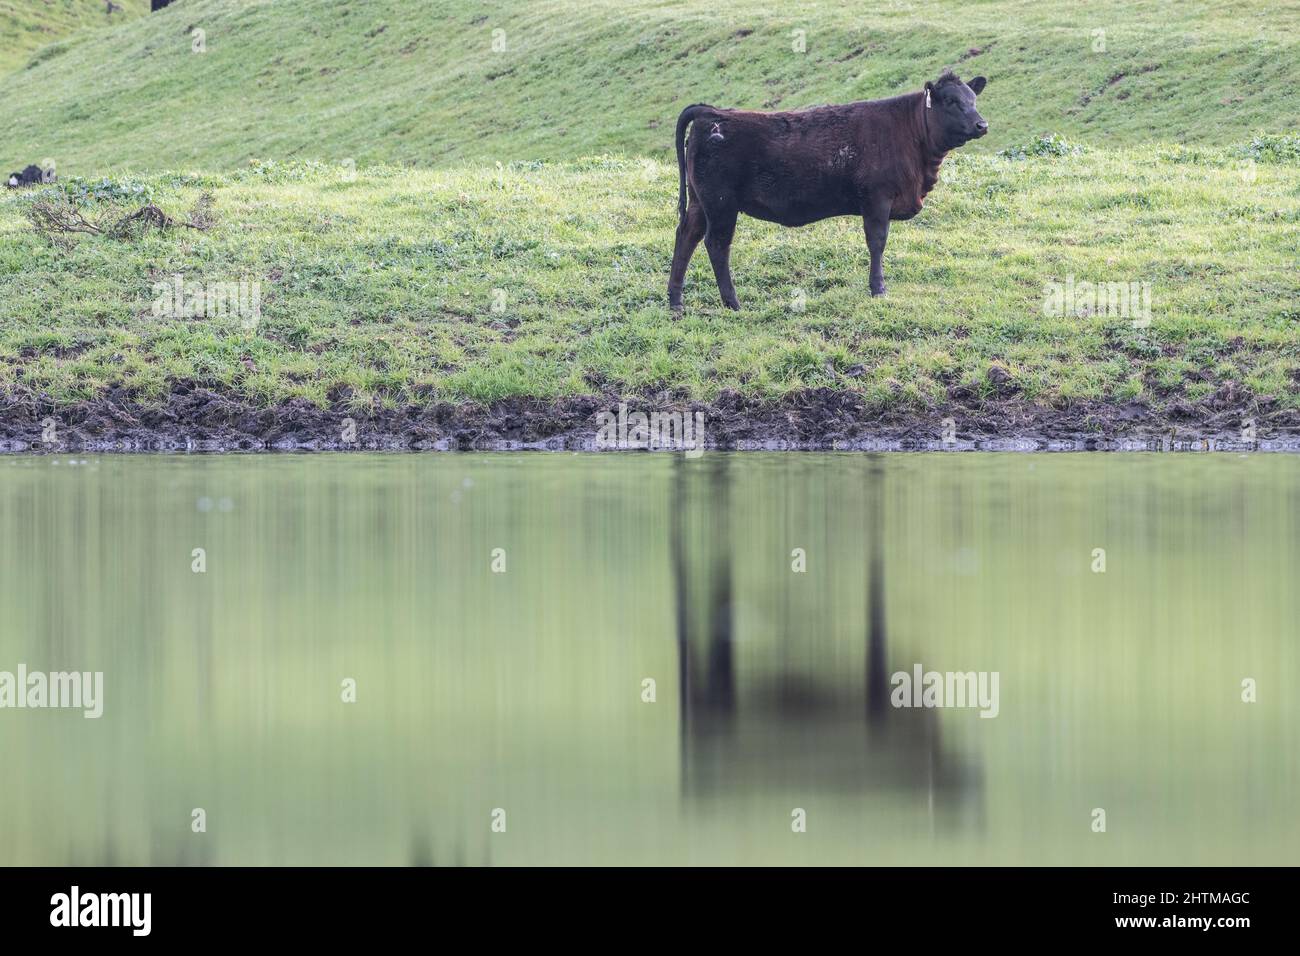 A cow stands at the edge of the water of a cattle pond in the East Bay region of California, USA. Stock Photo